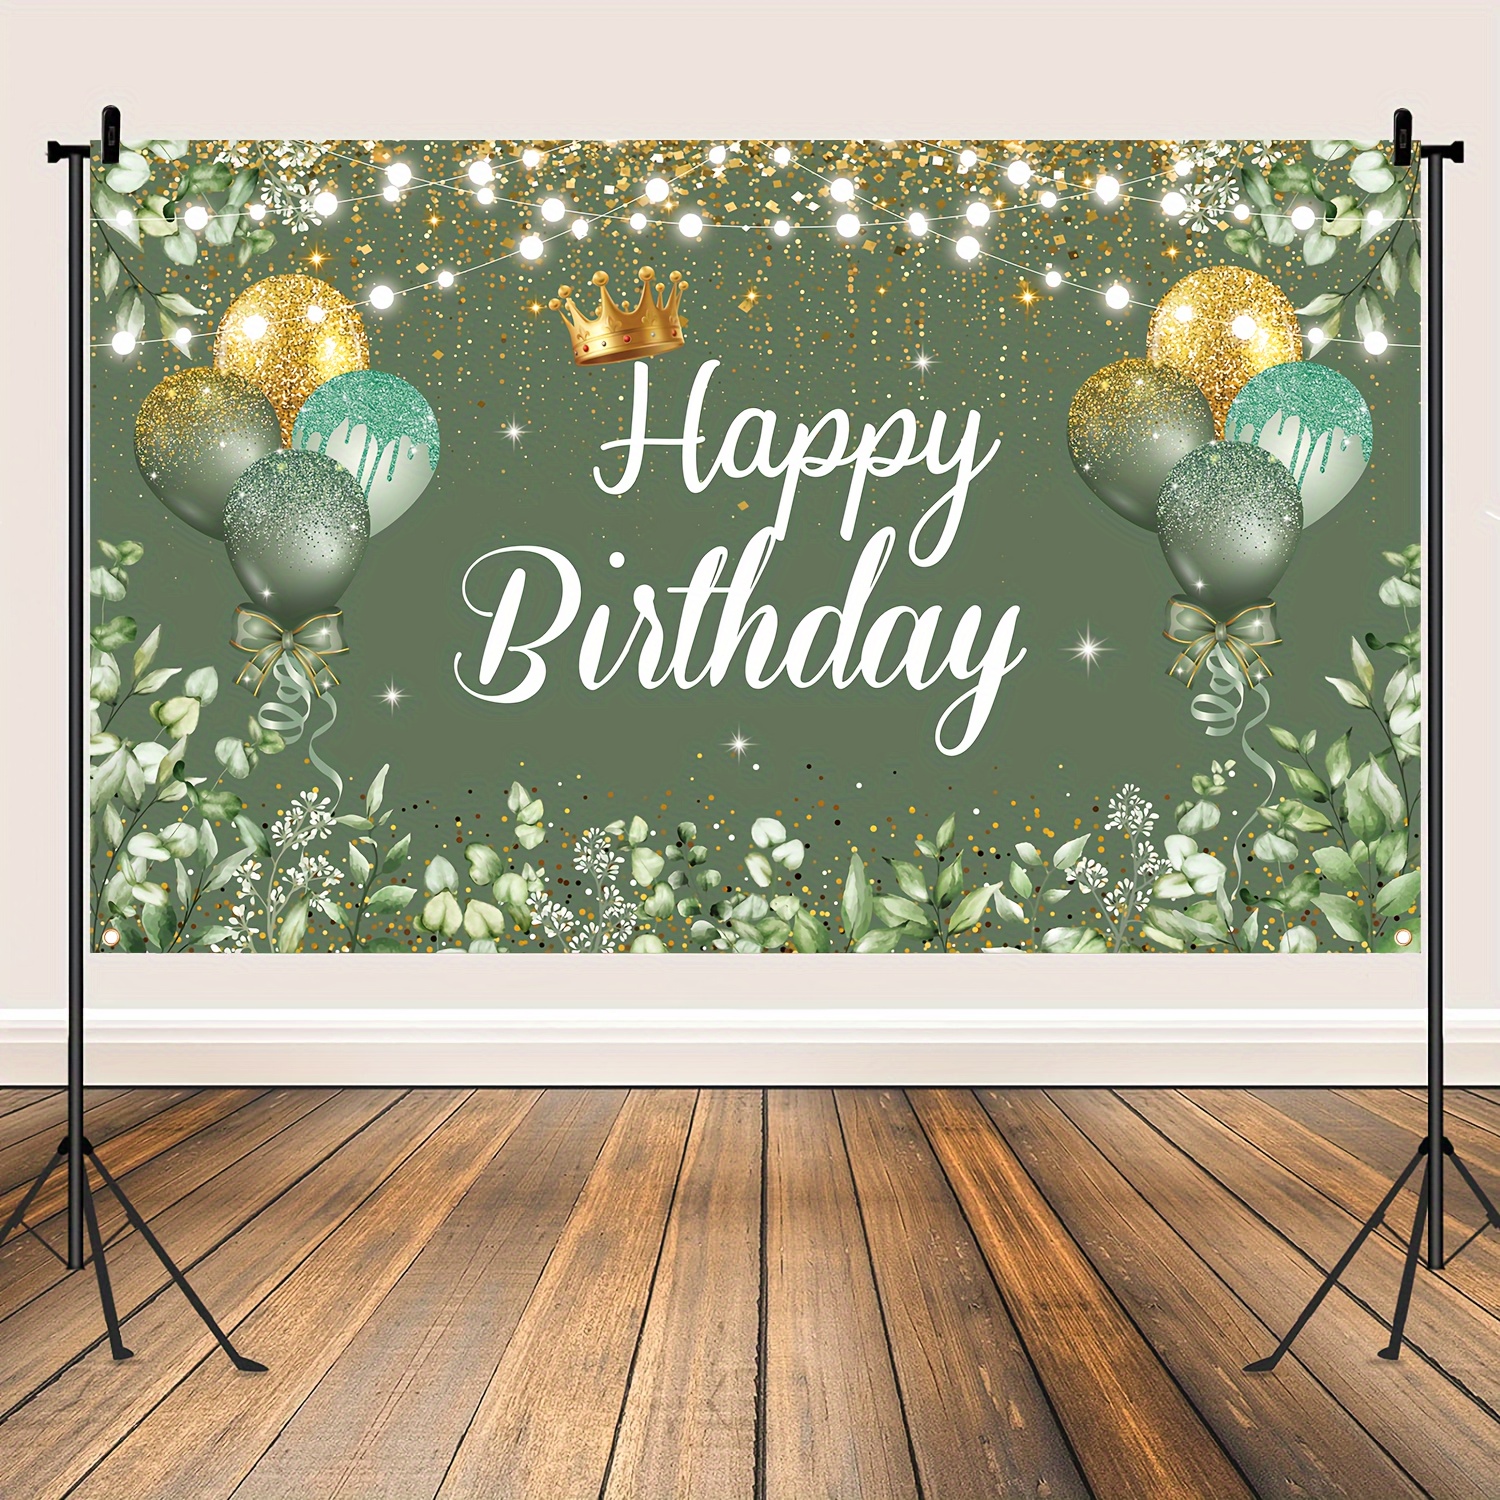 

Sage Green & Golden Sequin Balloon Birthday Banner - 70.8" X 43.3" Polyester Backdrop For Party Decorations, No Power Needed, Versatile Outdoor Use